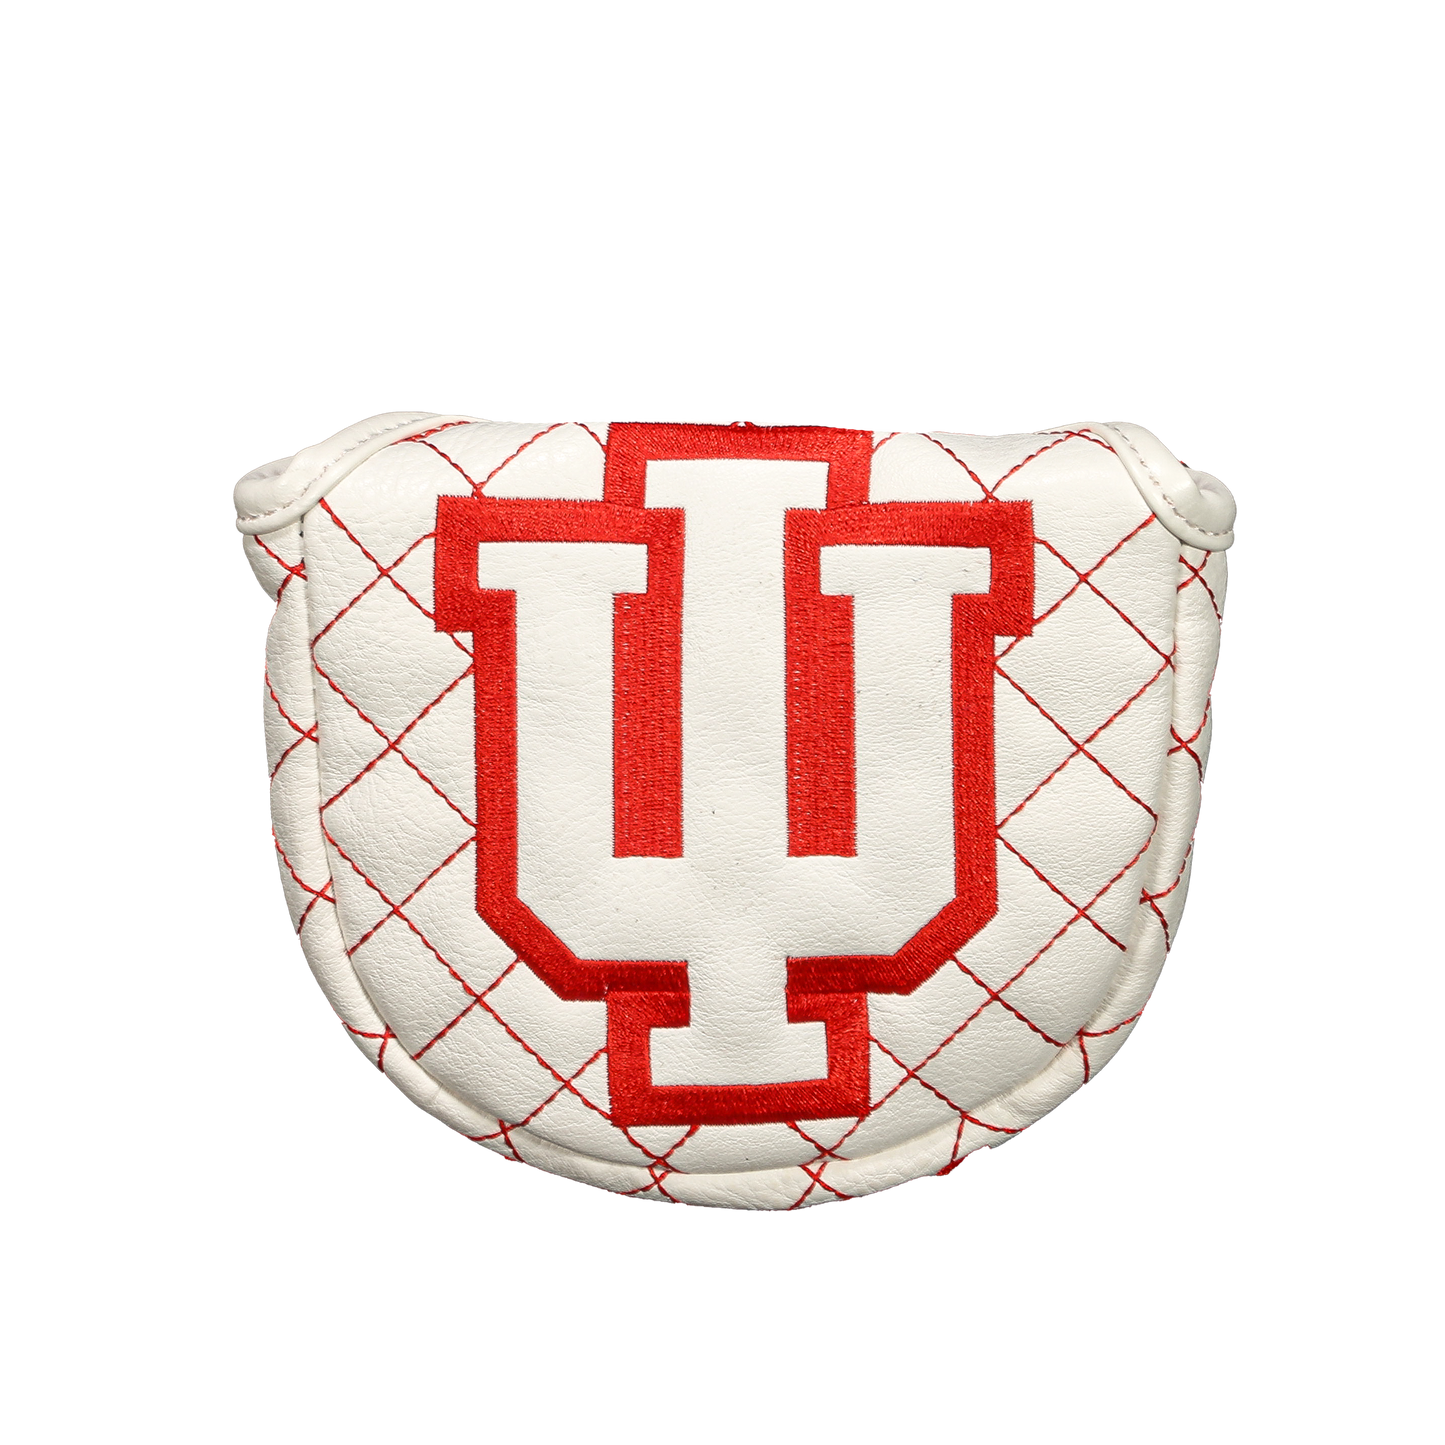 Indiana "Hoosiers" Mallet Putter Cover